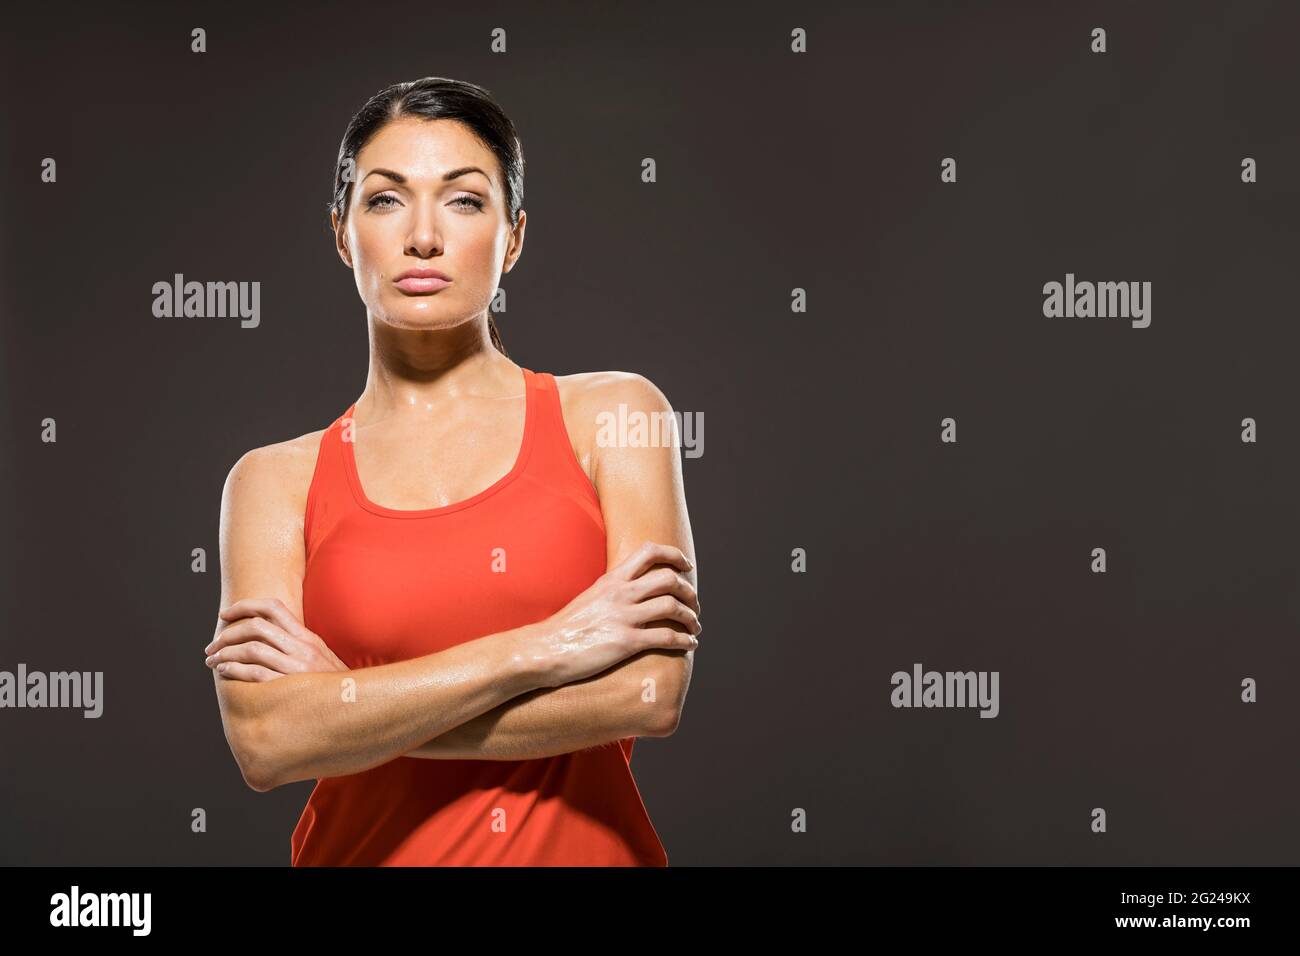 Studio portrait of athletic woman in red sleeveless top Stock Photo